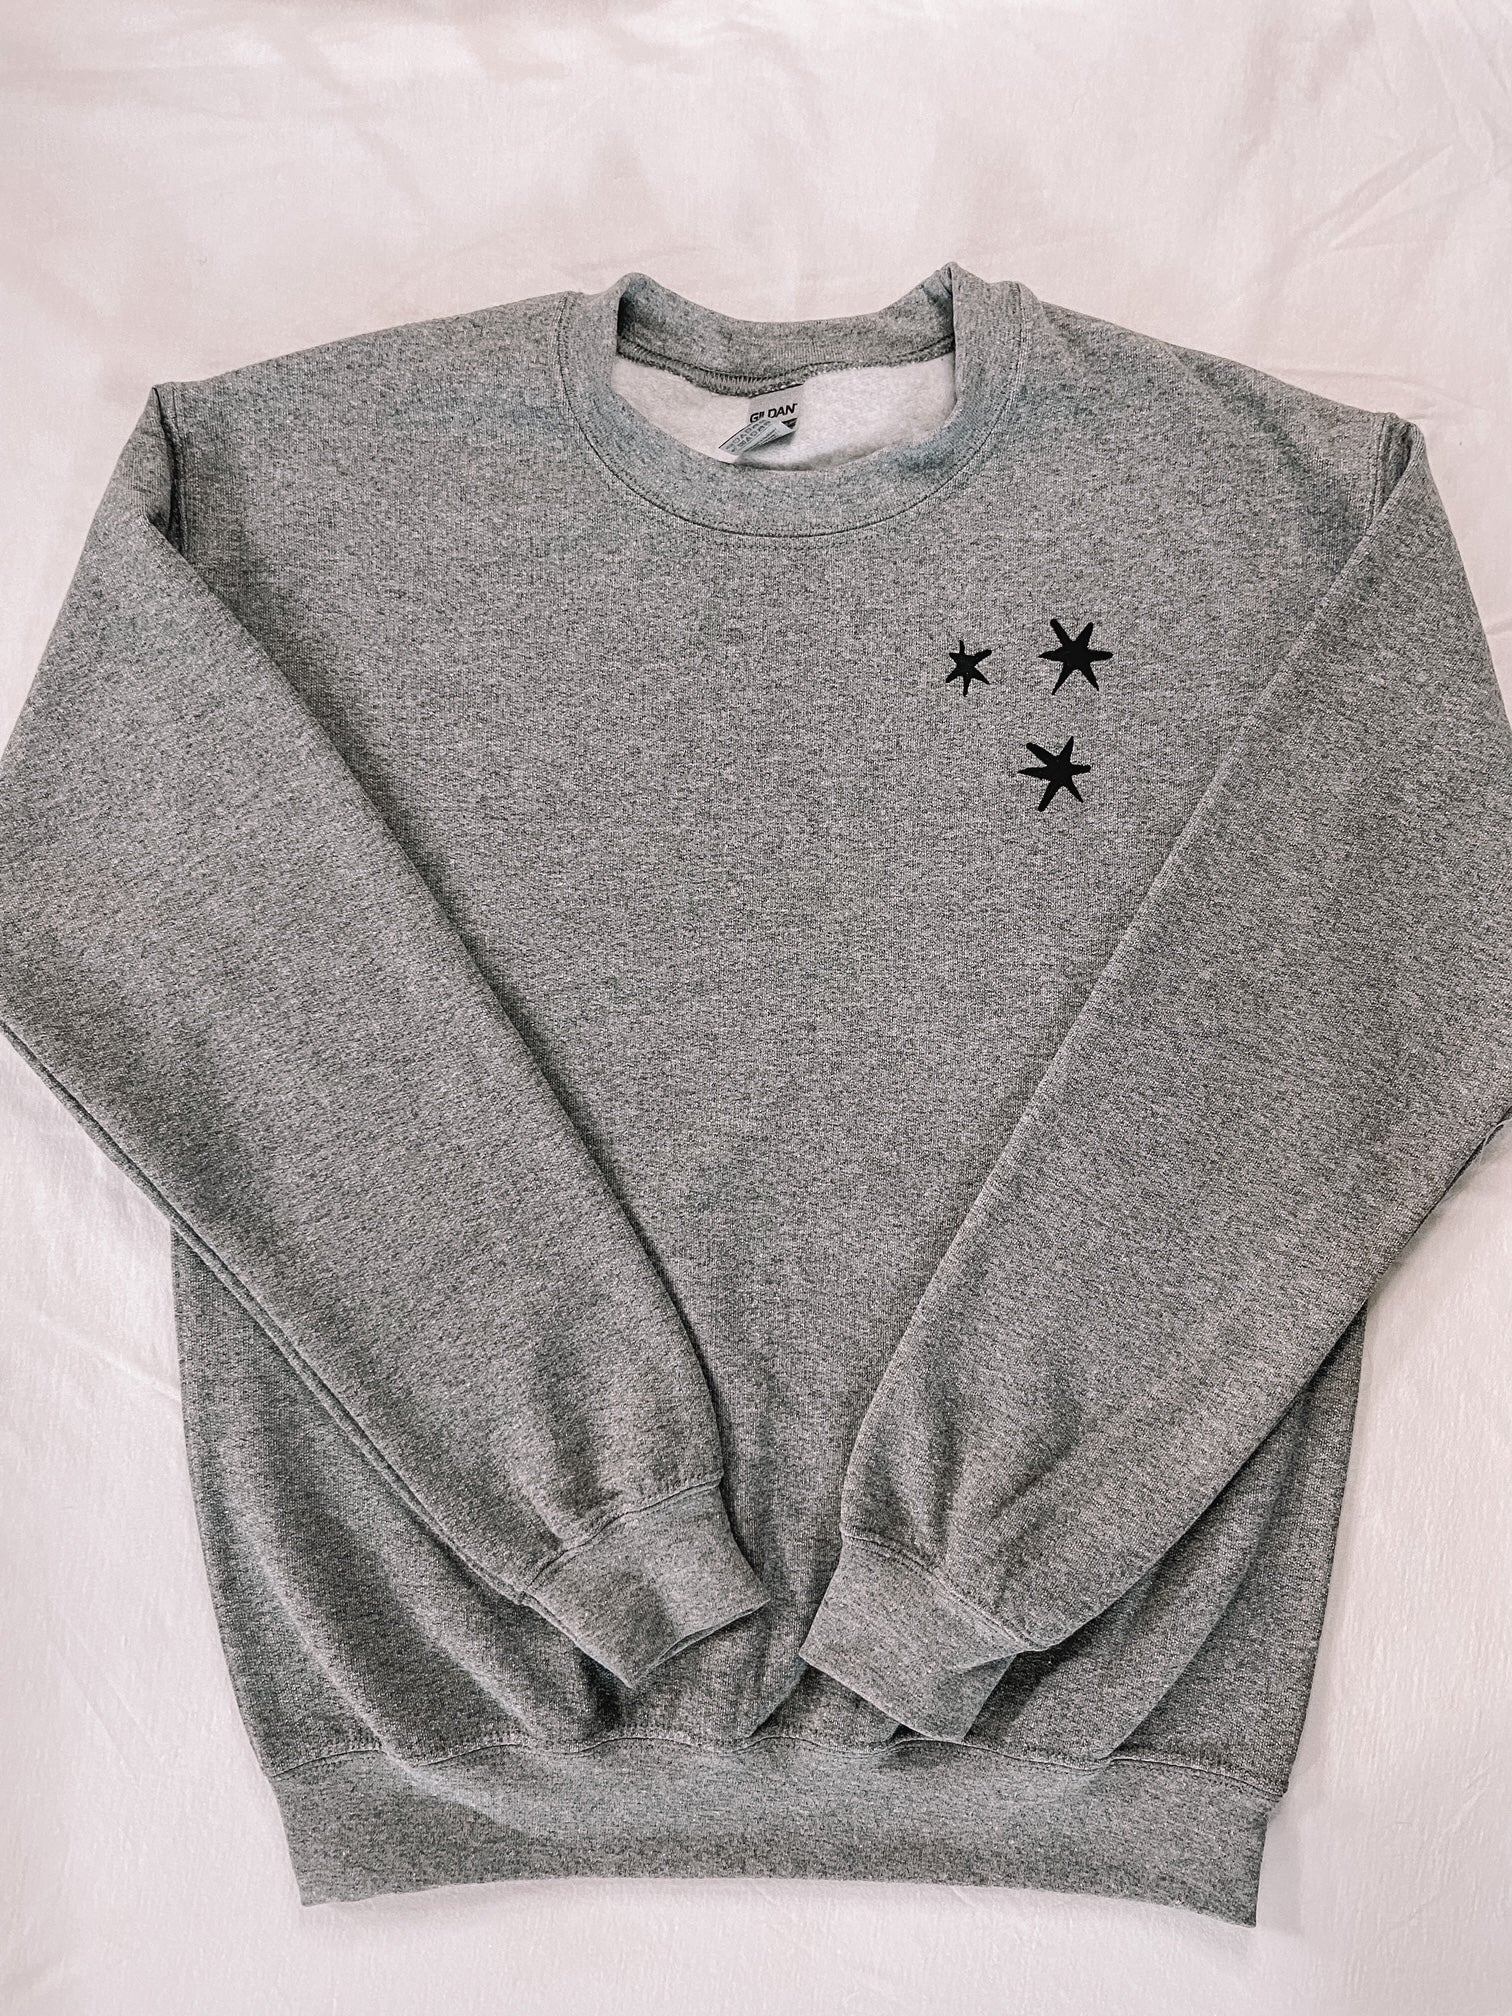 Charcoal Gray sweatshirt with 3 black embroidered stars on the left chest. 